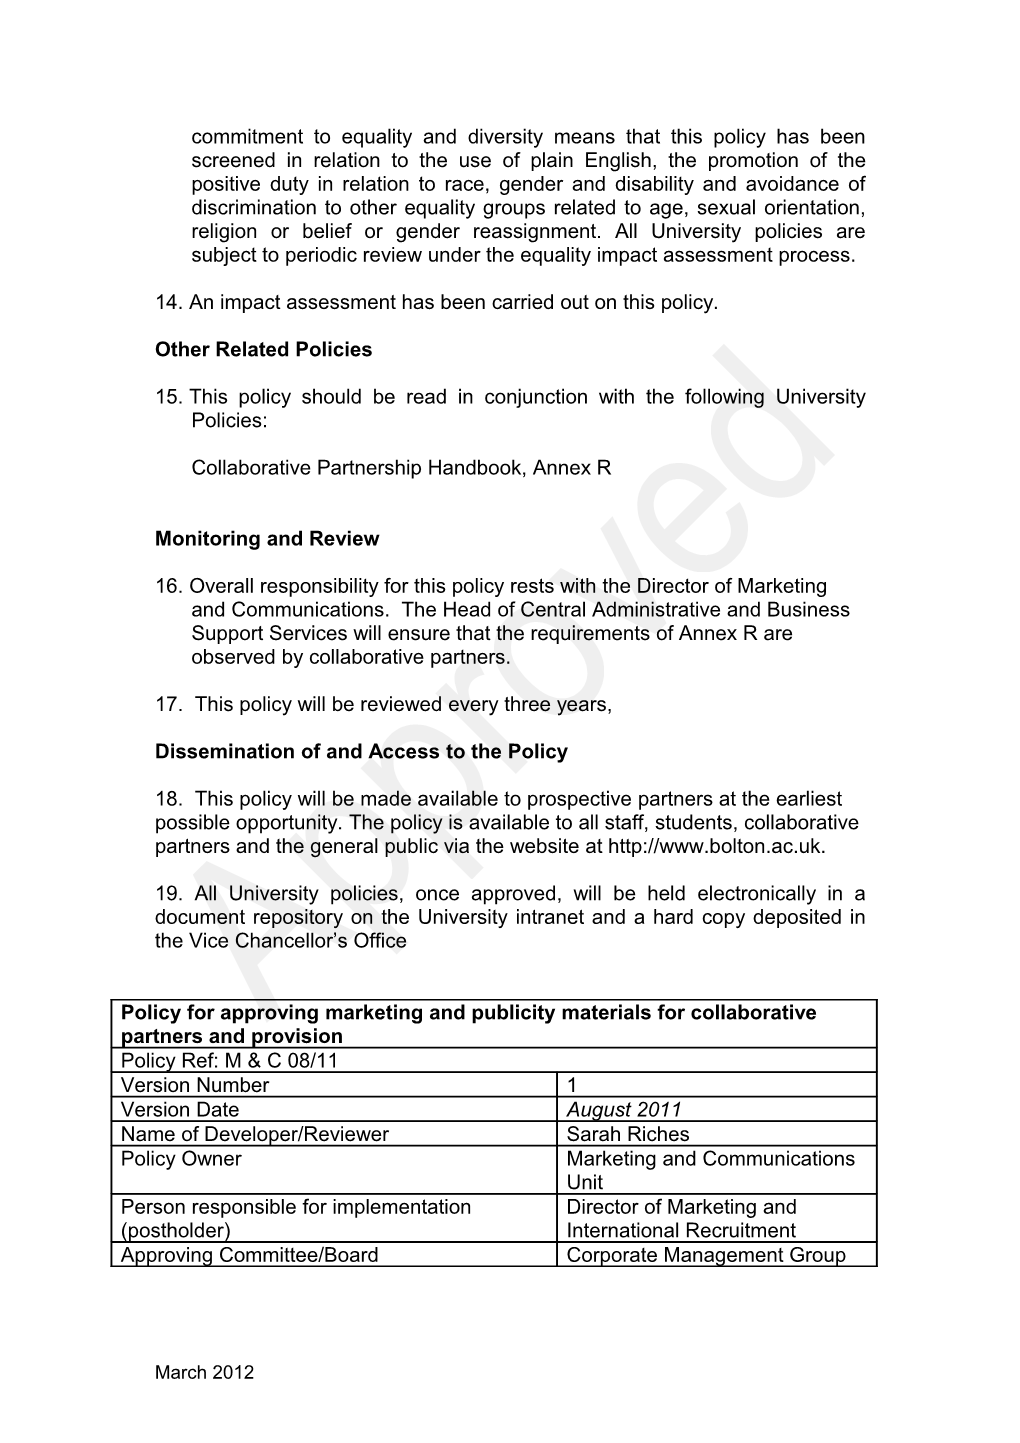 Policy for Approving Marketing and Publicity Materials for Collaborative Partnerships